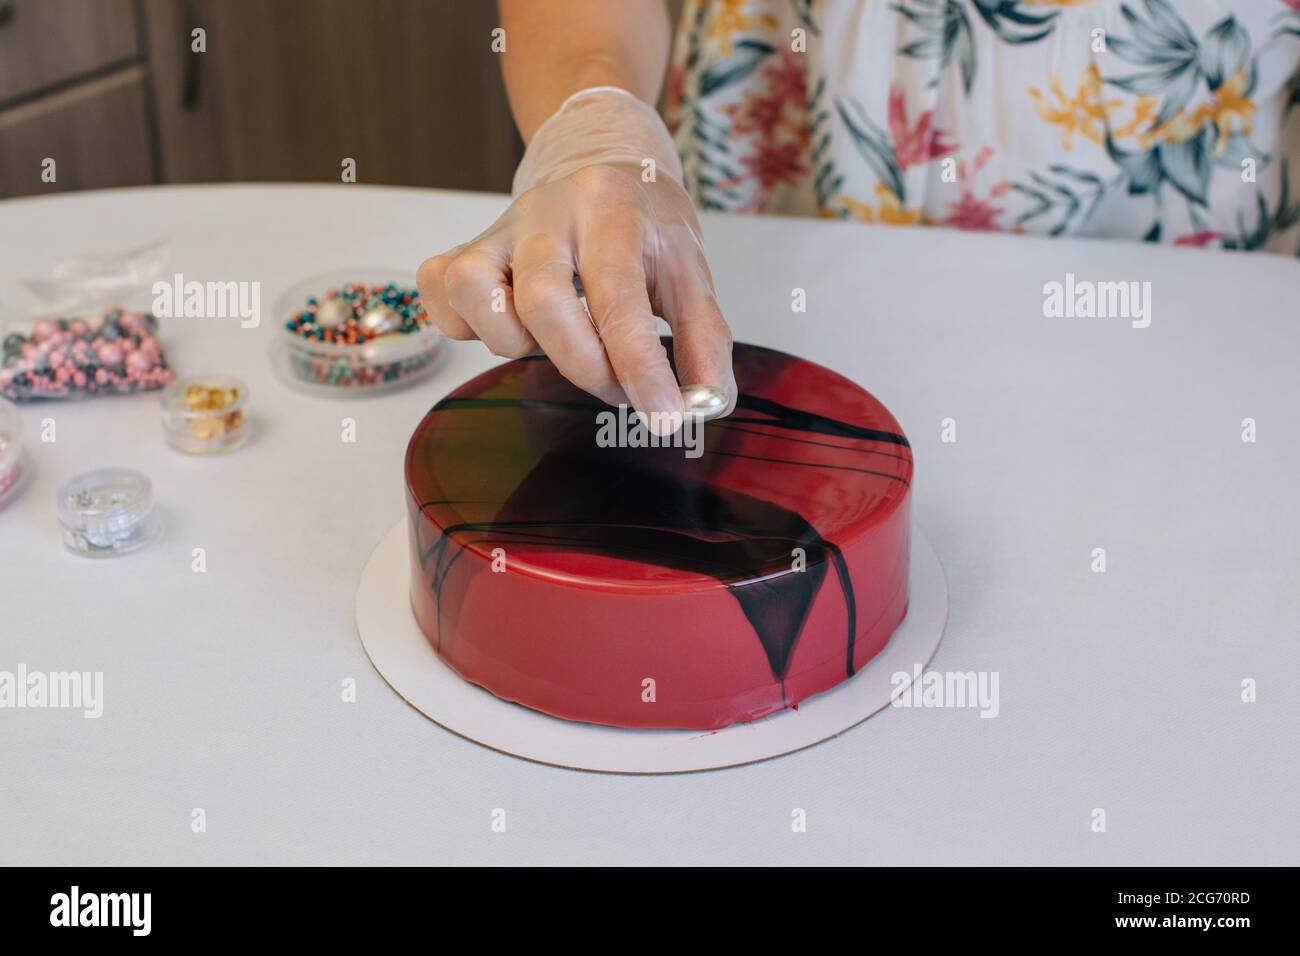 Woman decorating a home made chocolate red velvet chocolate cake Stock Photo